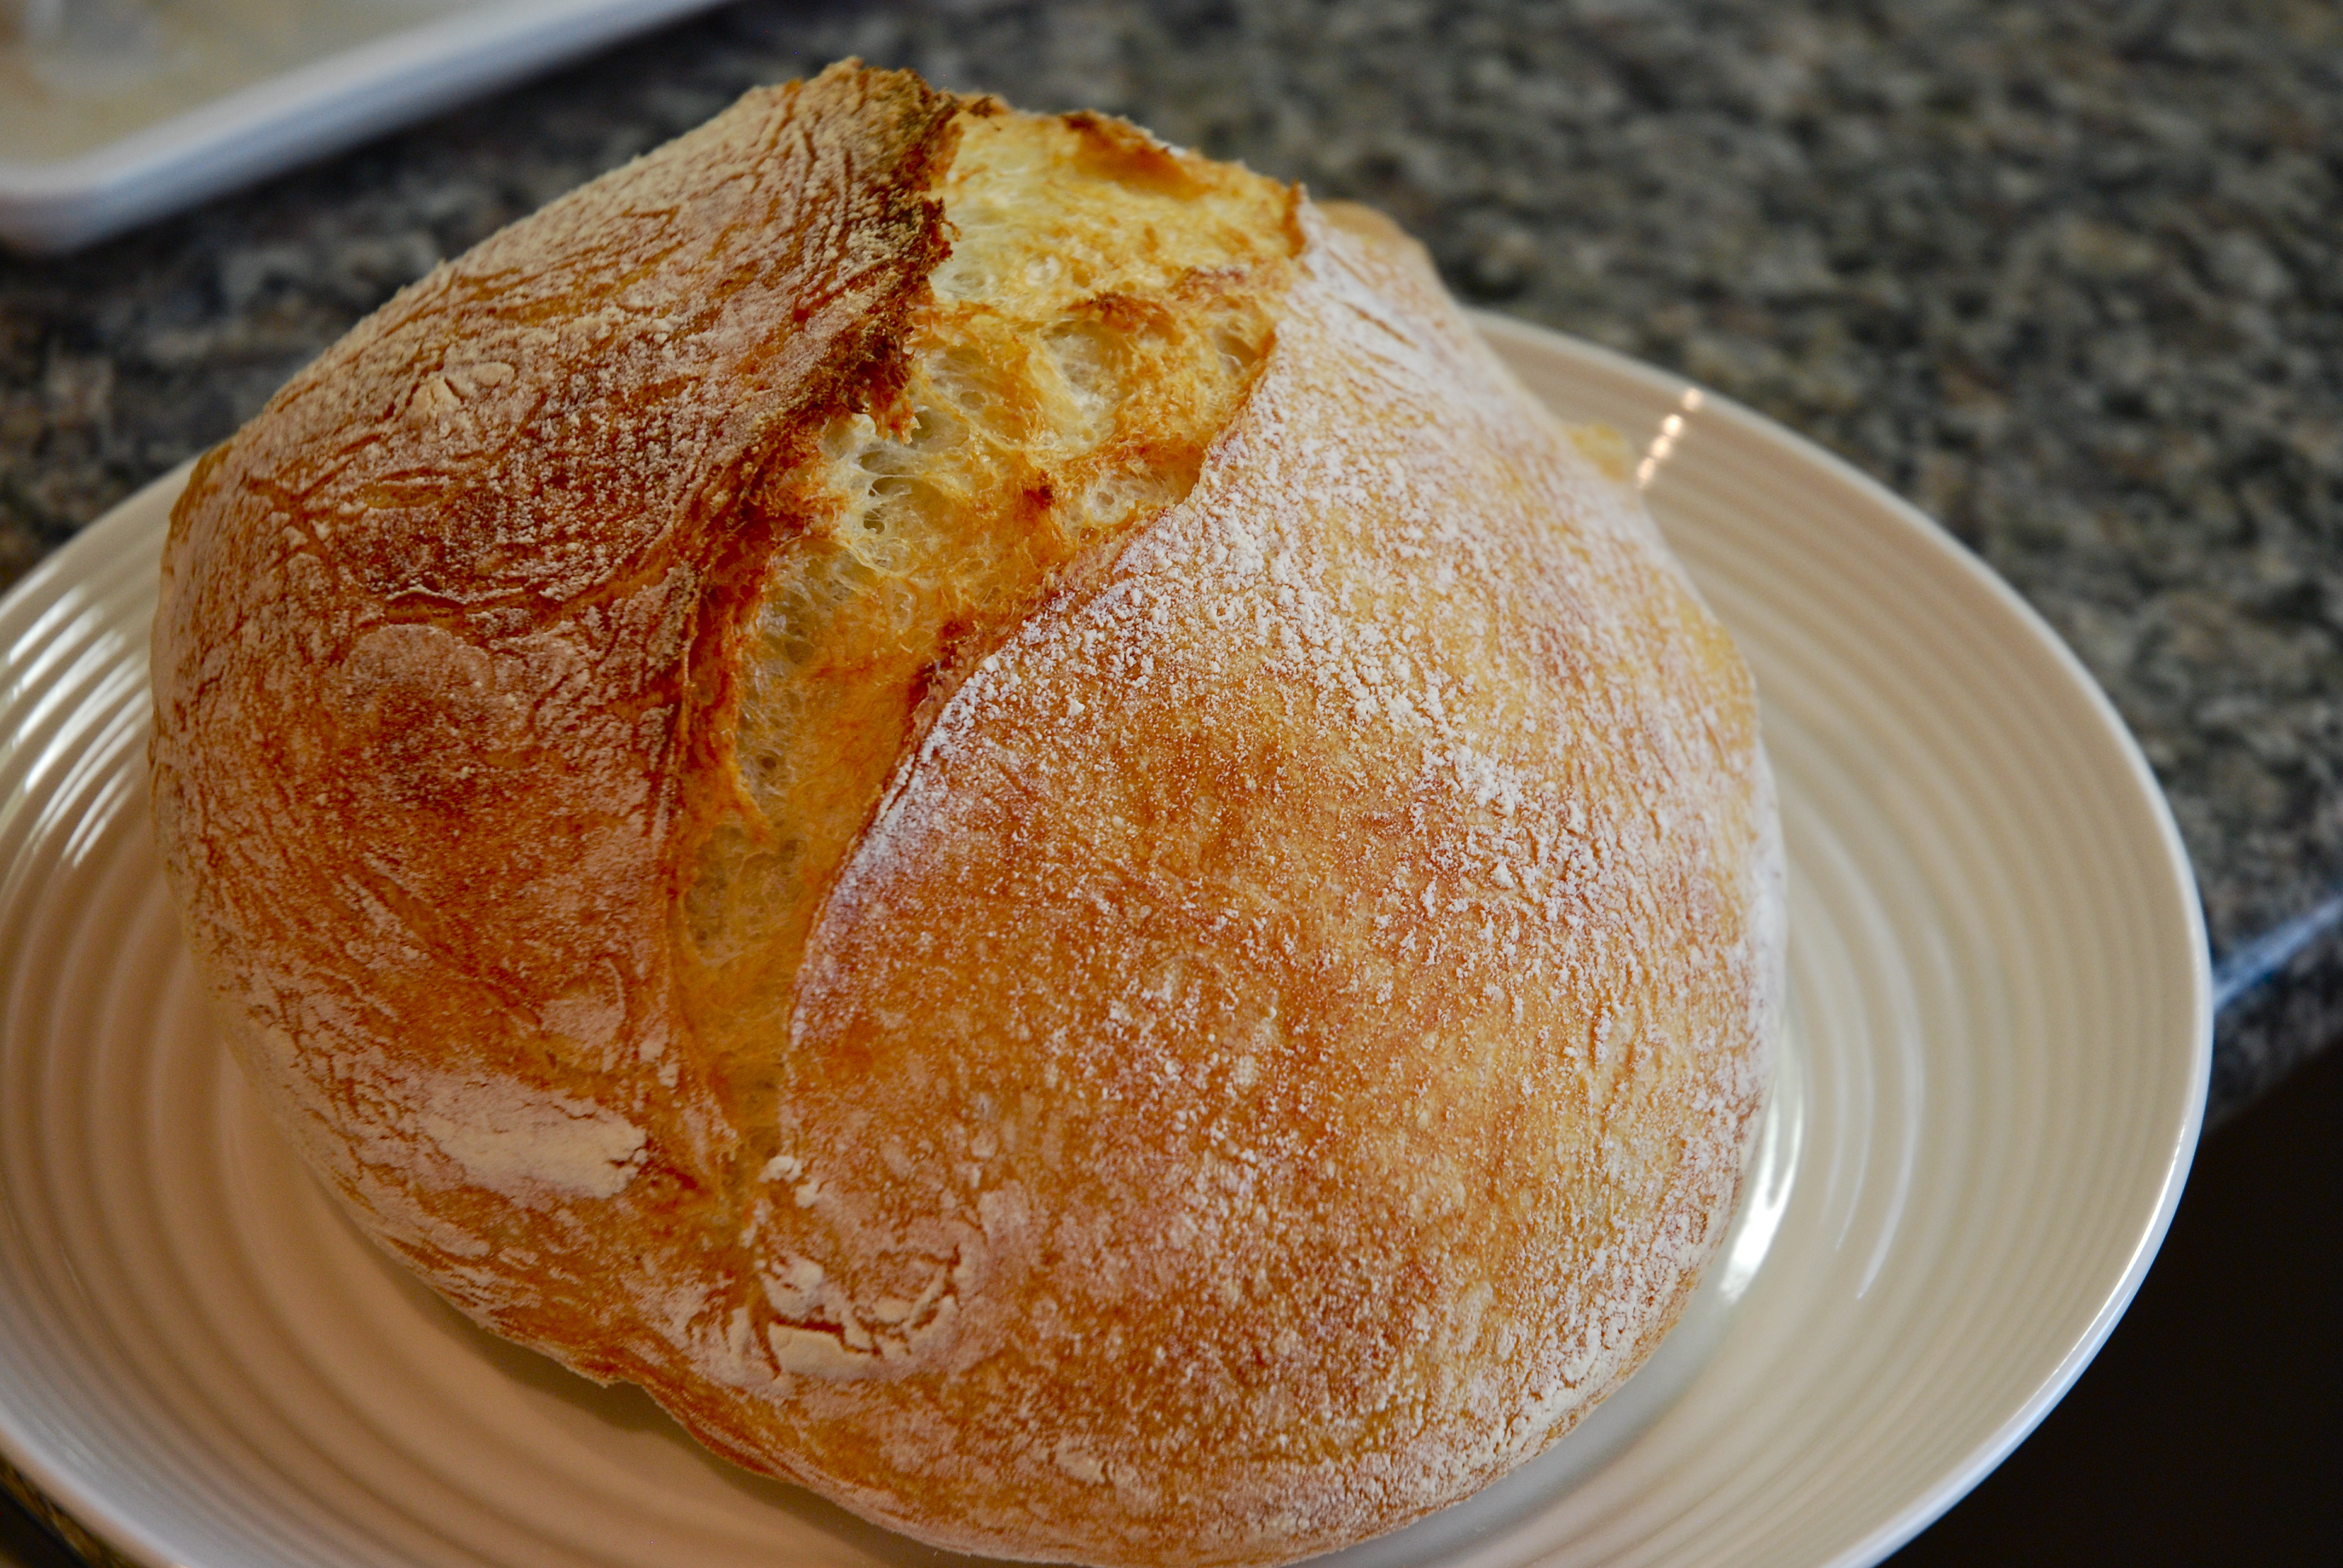 How to Make Homemade Bread